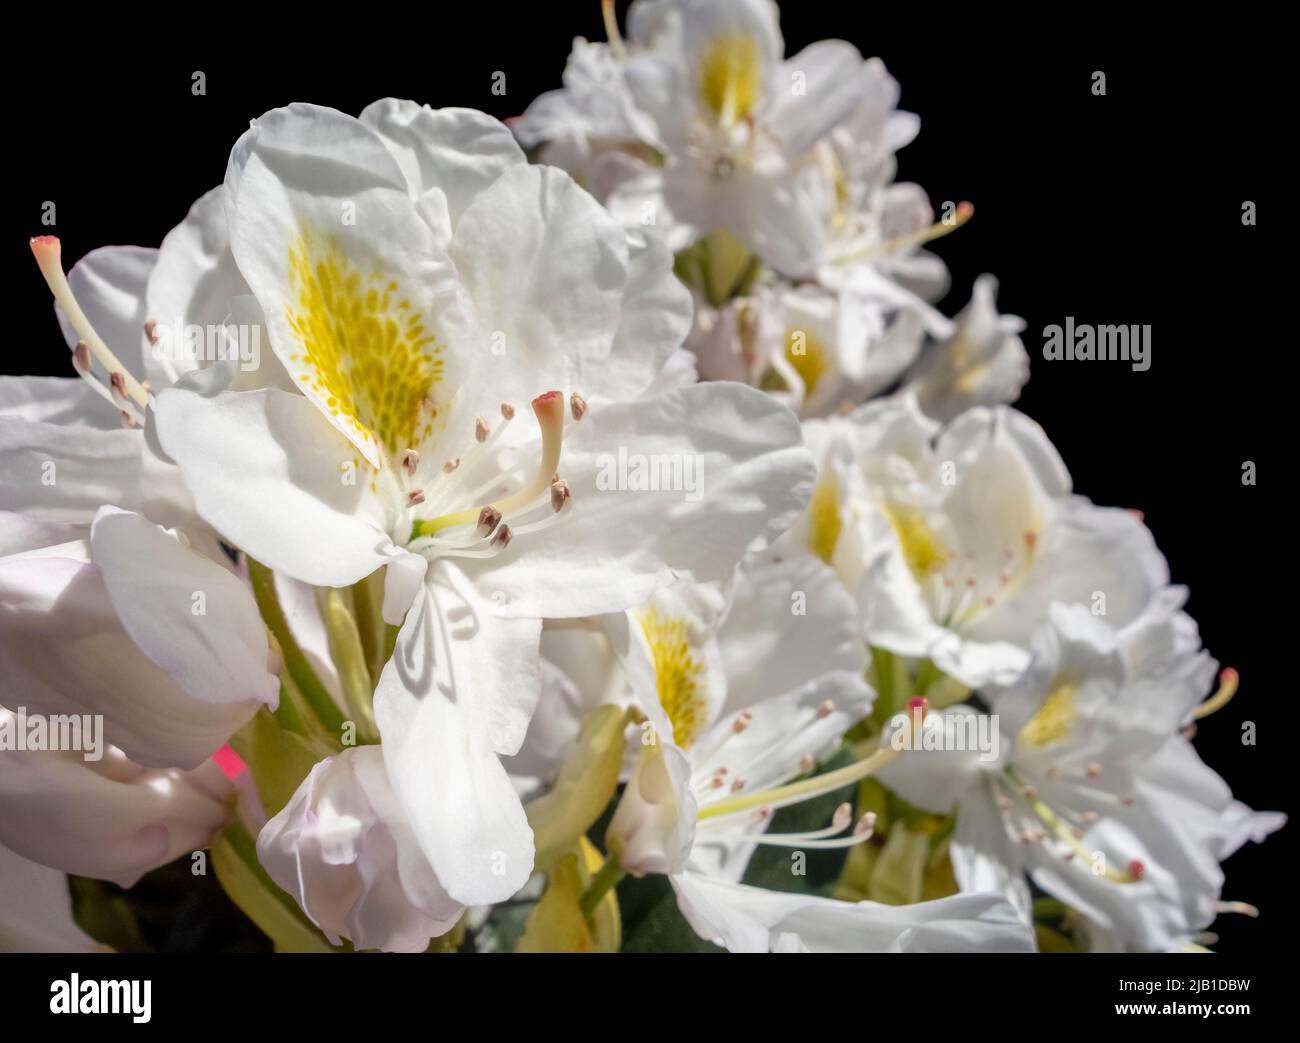 Sunny illuminated mostly white Rhododendron flowers in black back Stock Photo